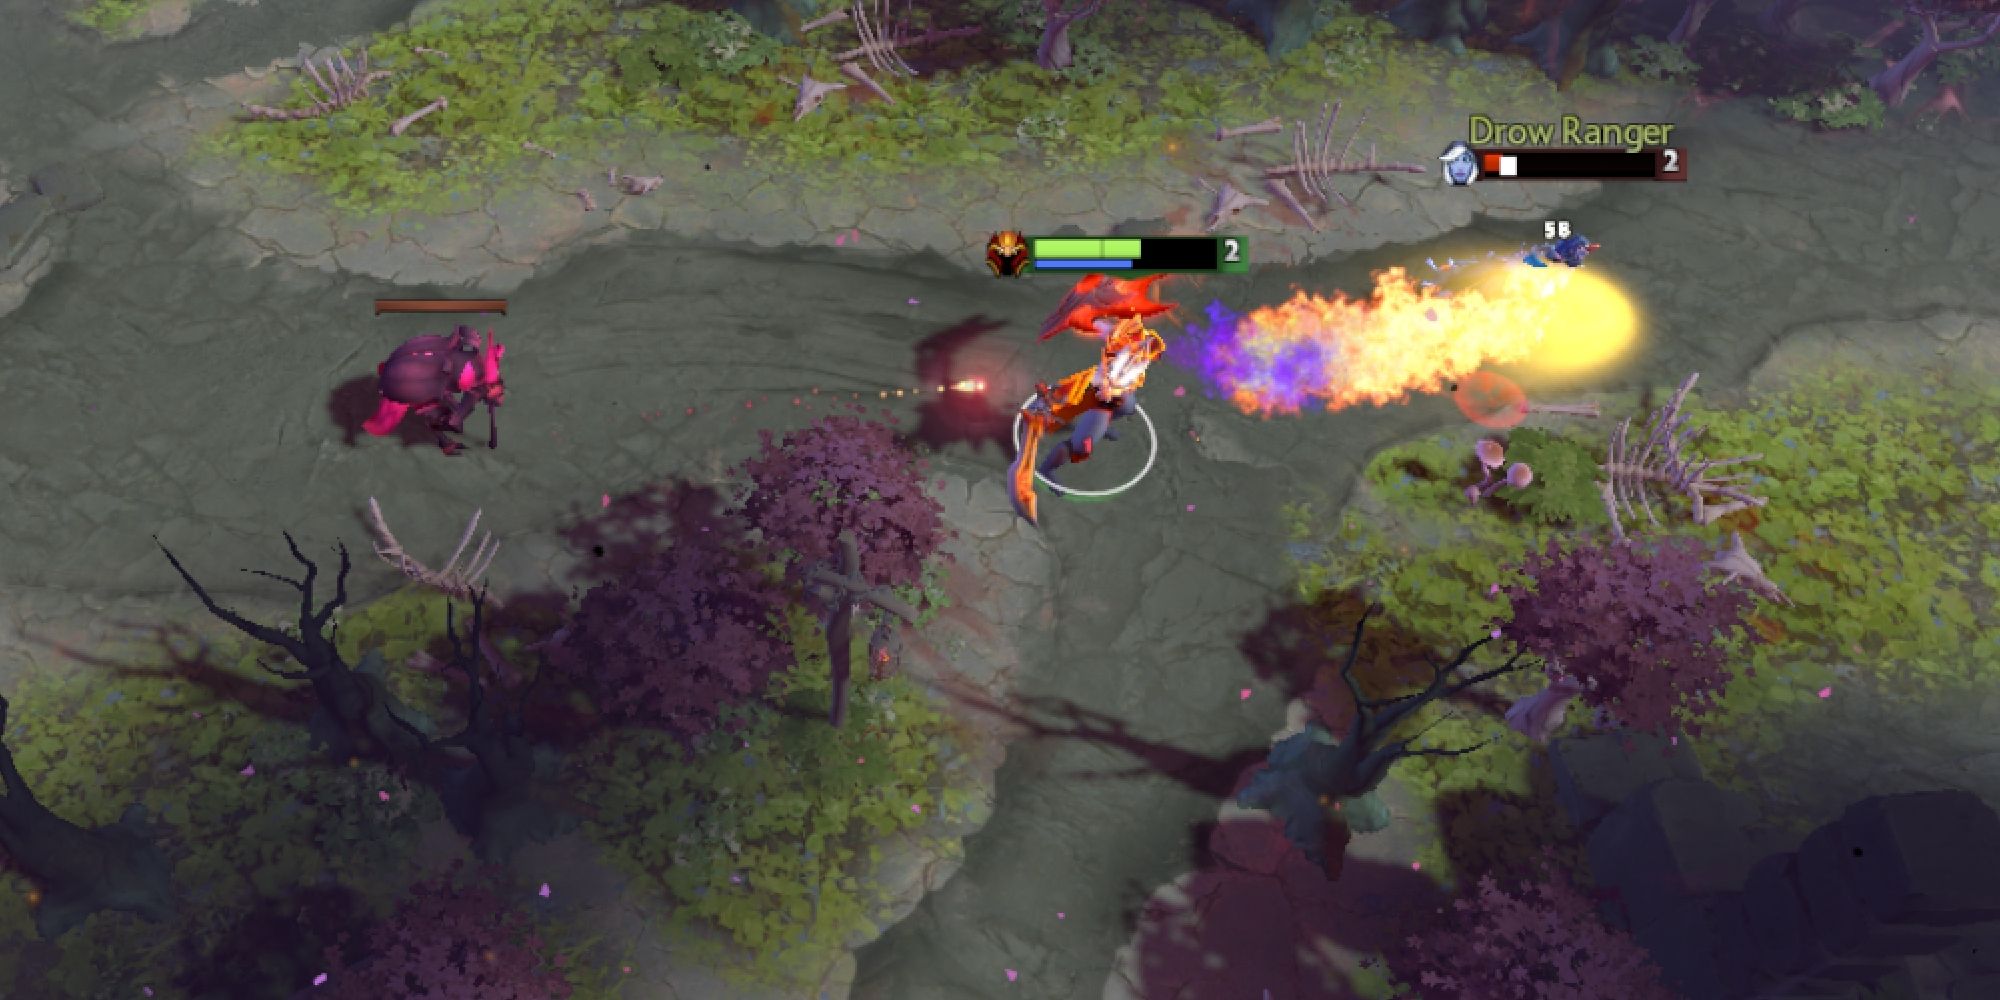 Dragon Knight uses Breathe Fire to kill an enemy hero in the off lane